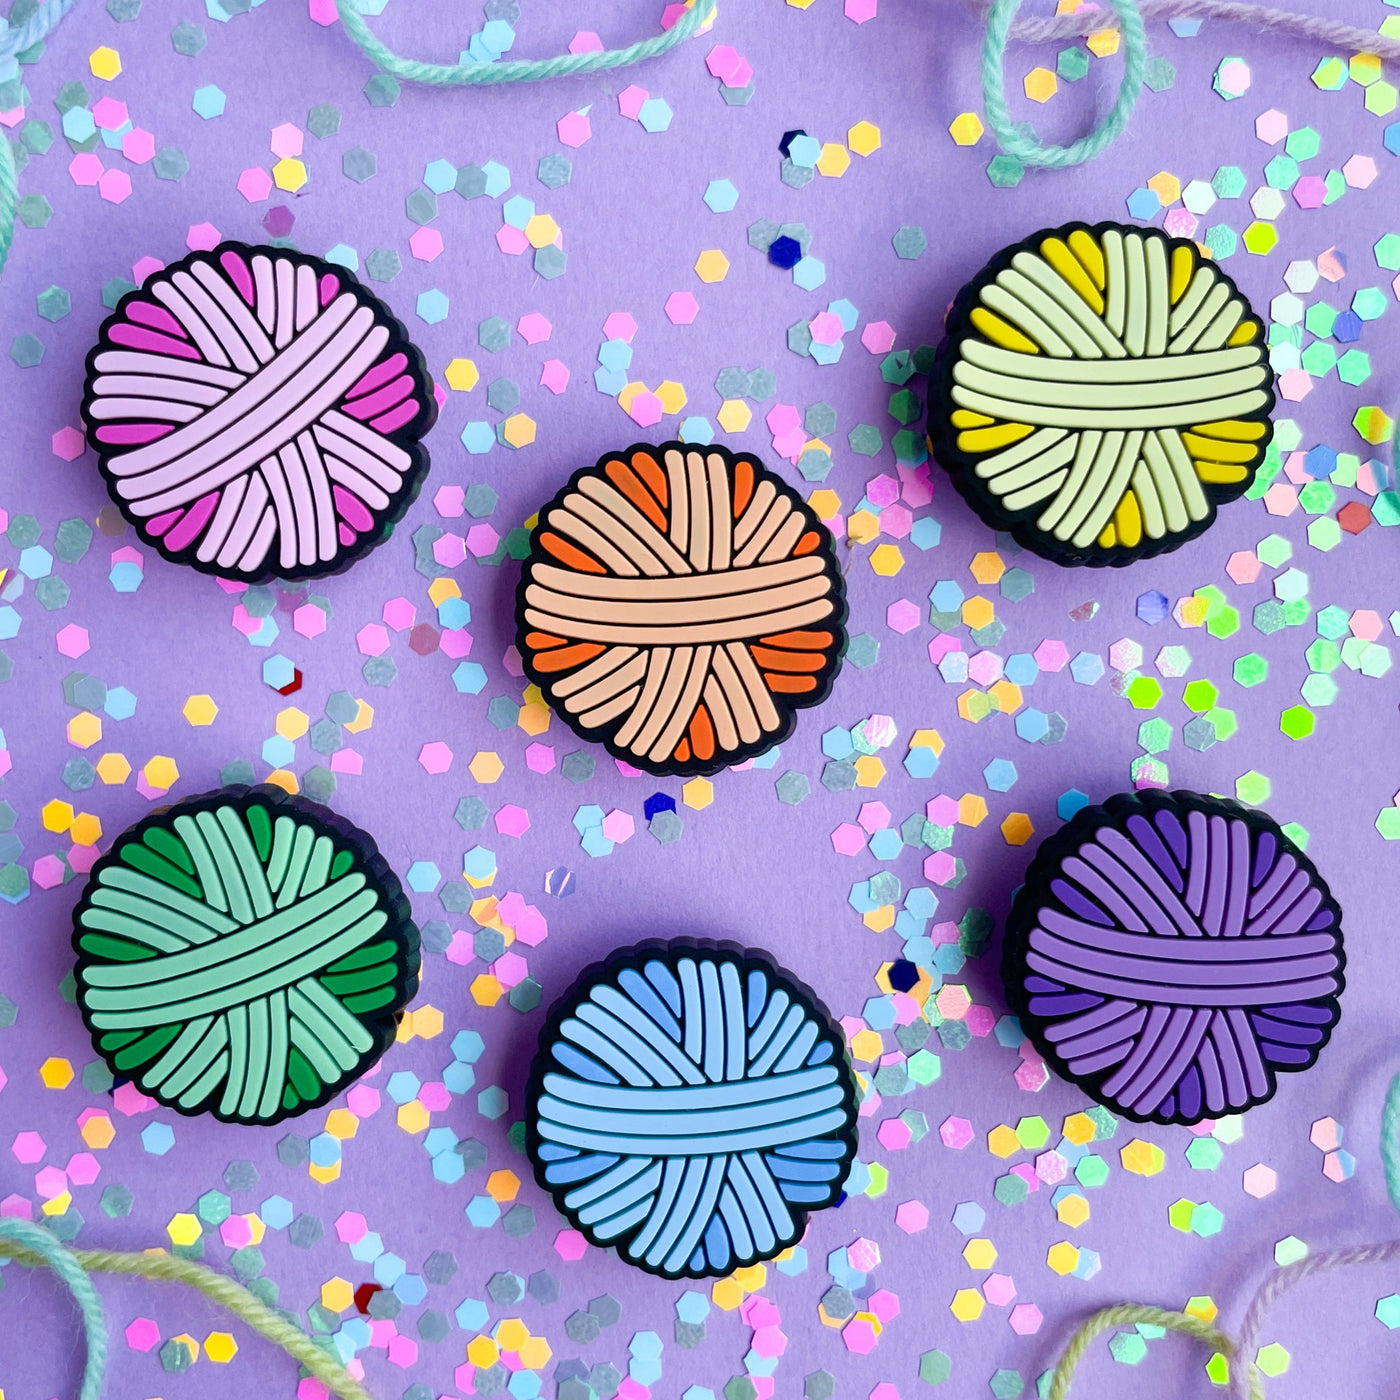 PVC charms shaped like yarn balls in pink, orange, yellow, mint, blue, and purple on a lavender background covered in confetti. 